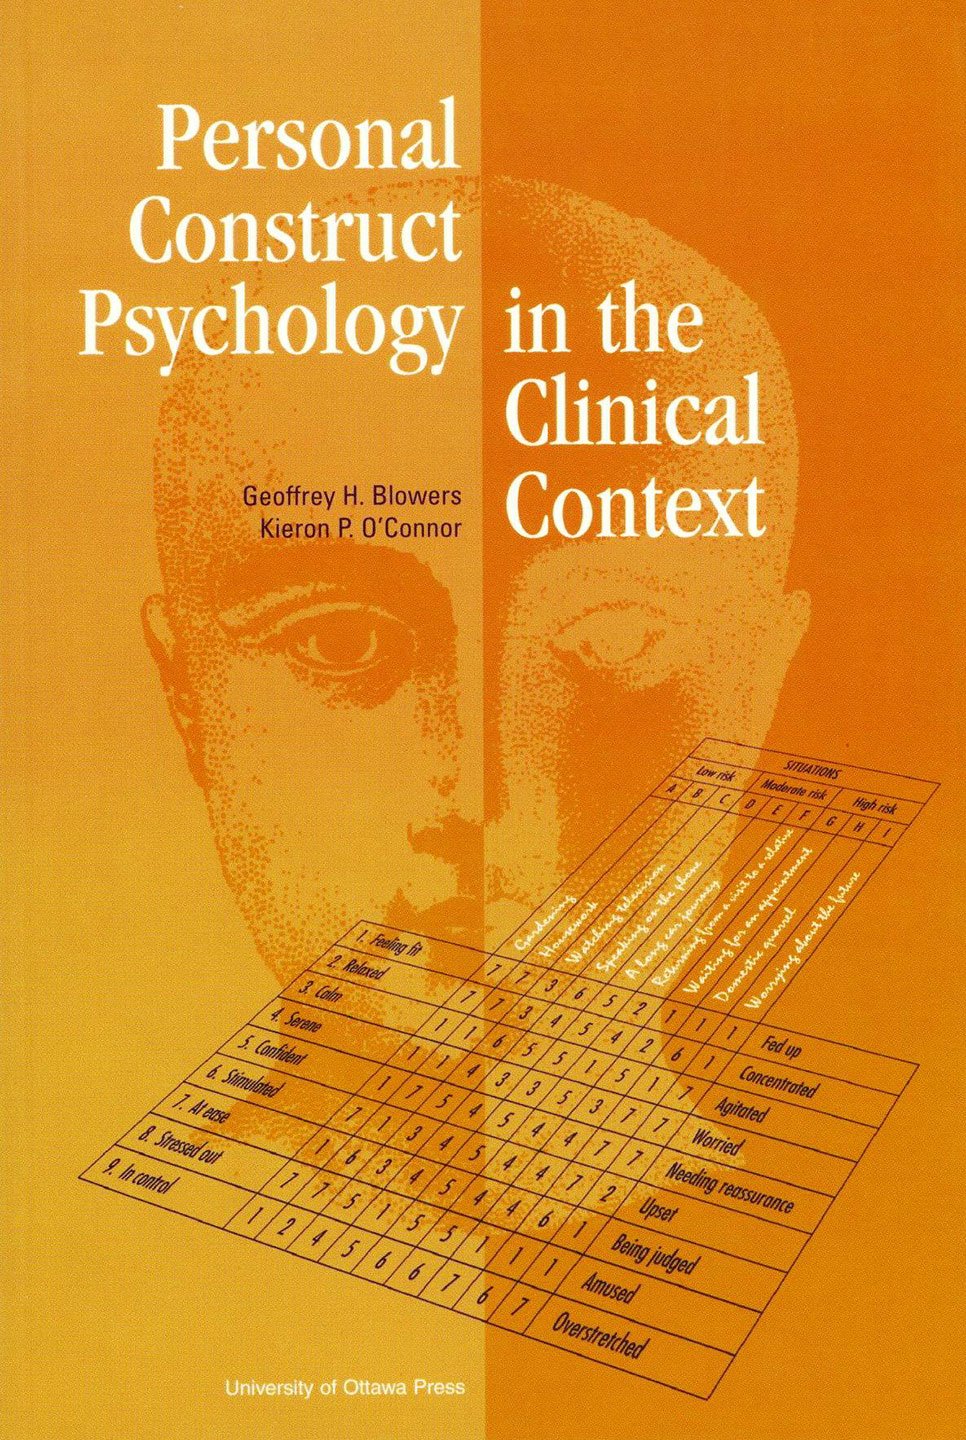 Personal Construct Psychology in the Clinical Context